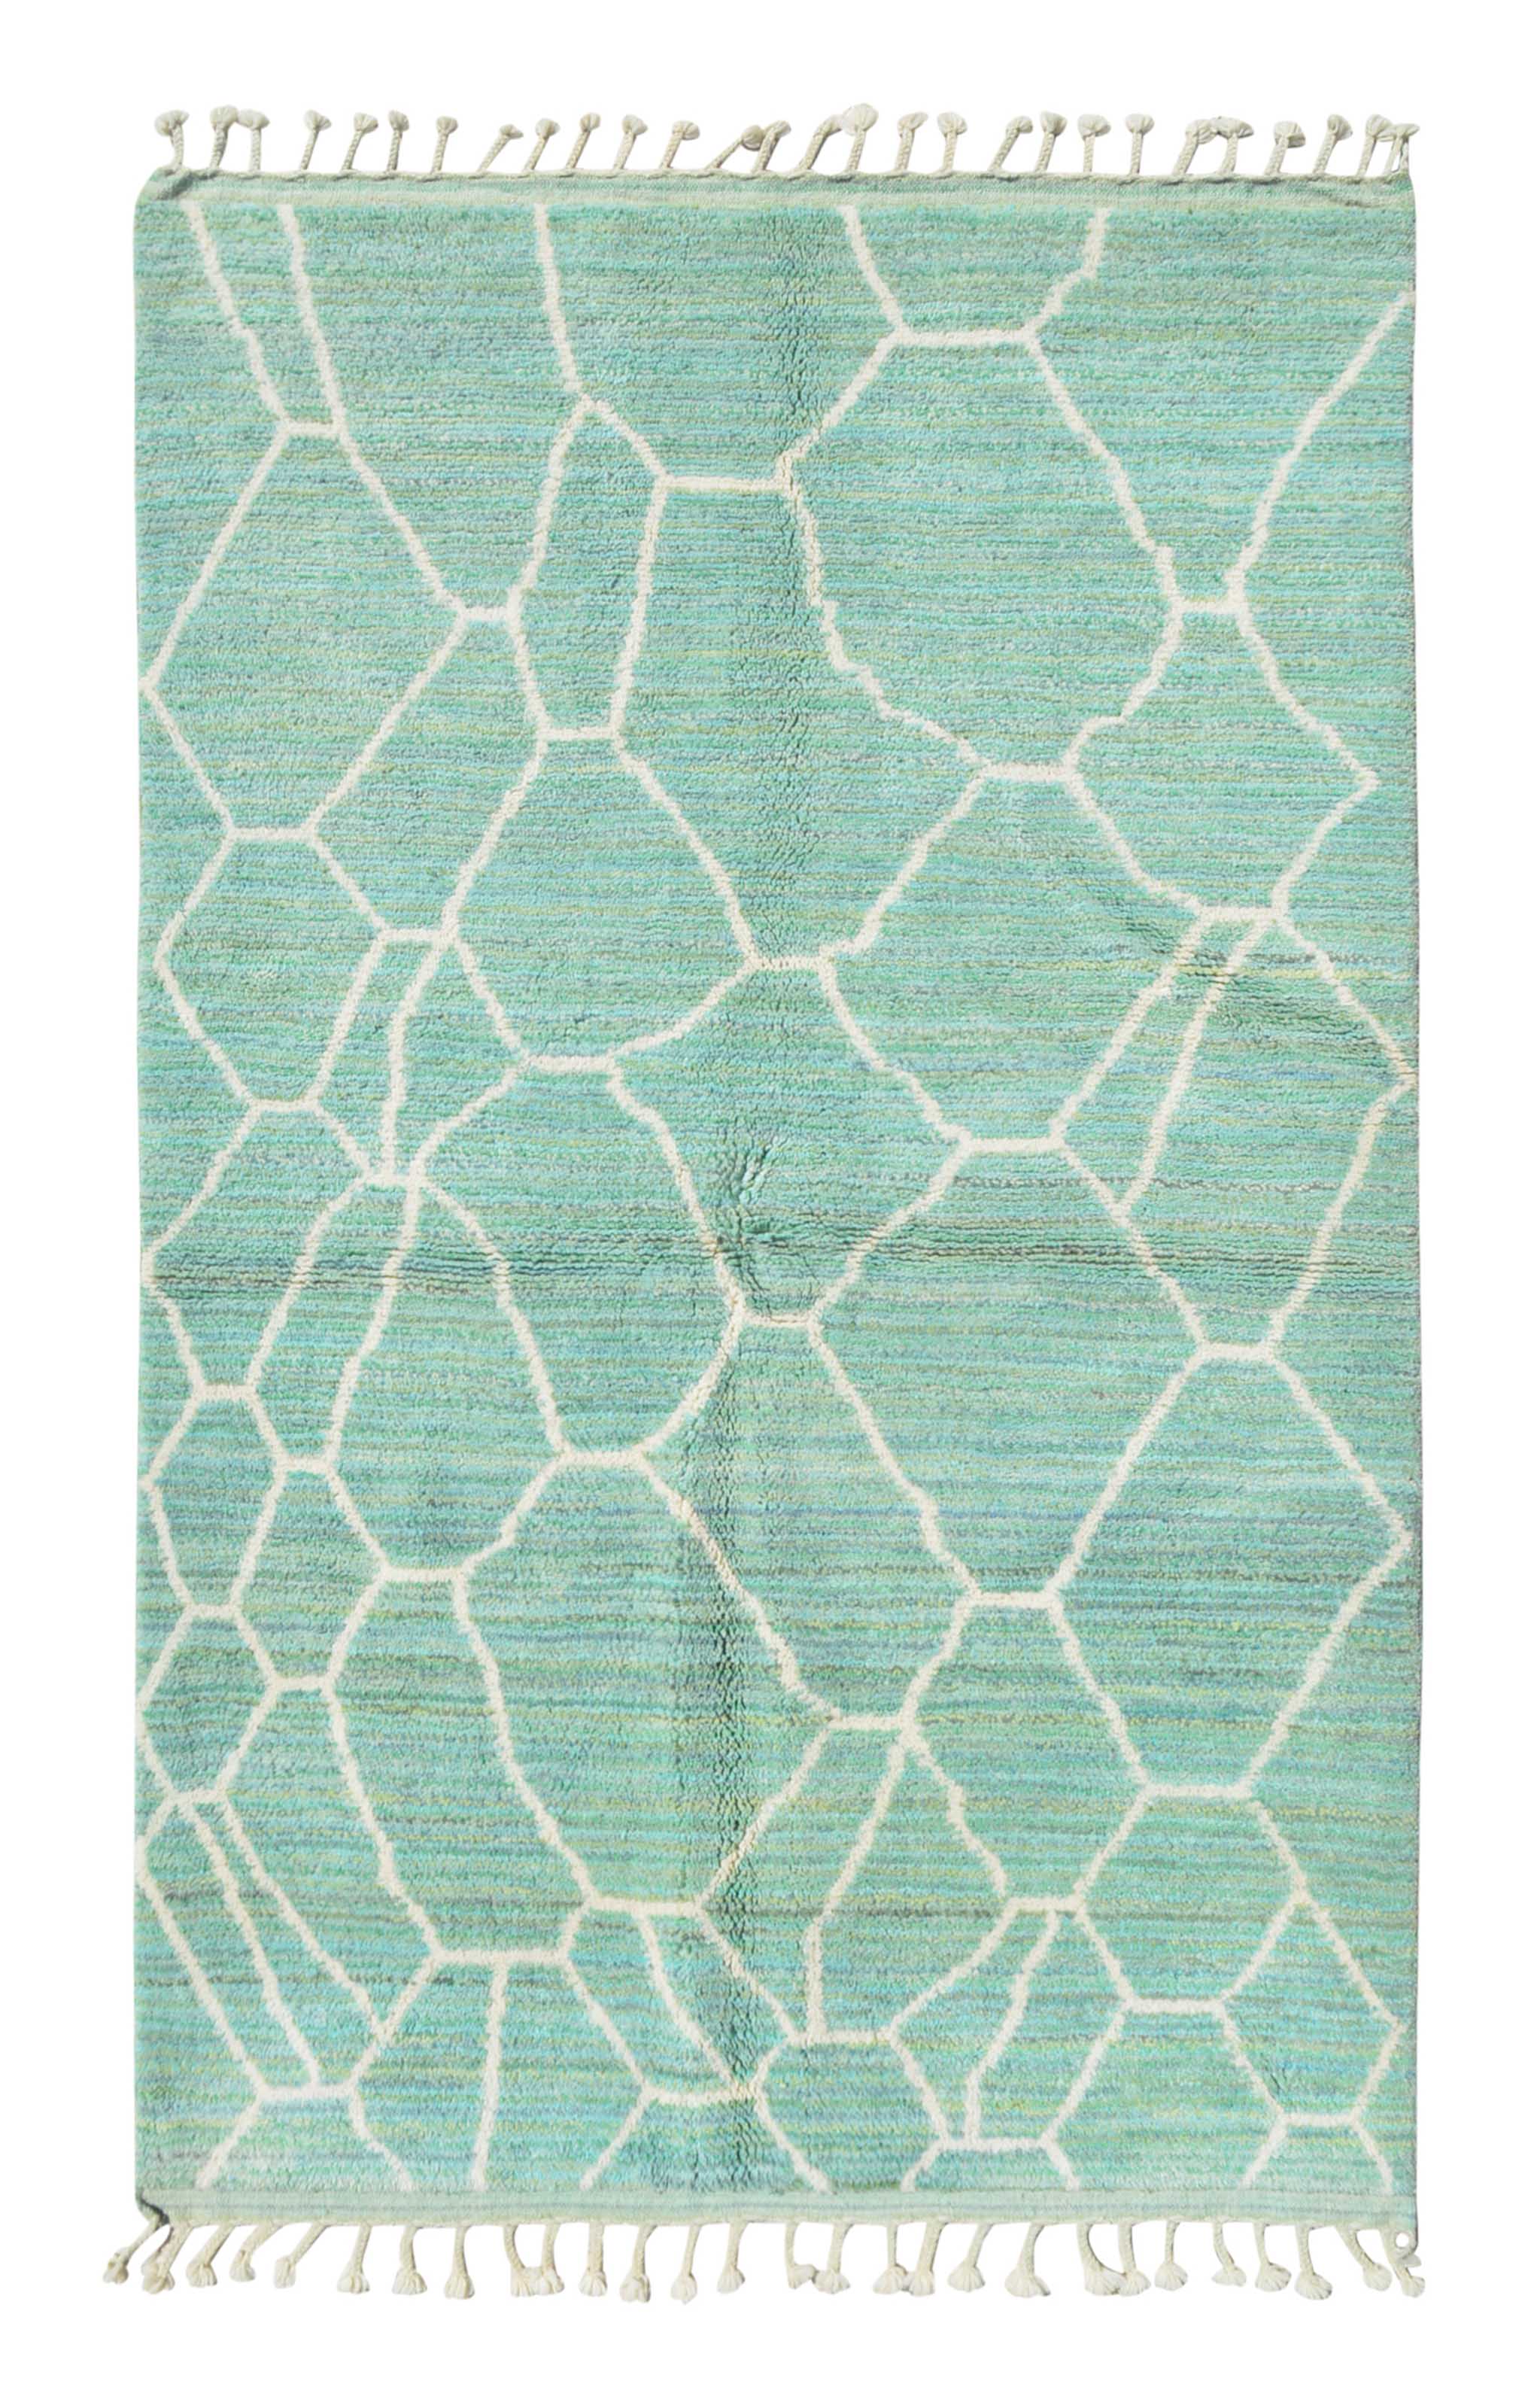 Surf Moroccan Rug - Handwoven Turquoise and White Geometric Design